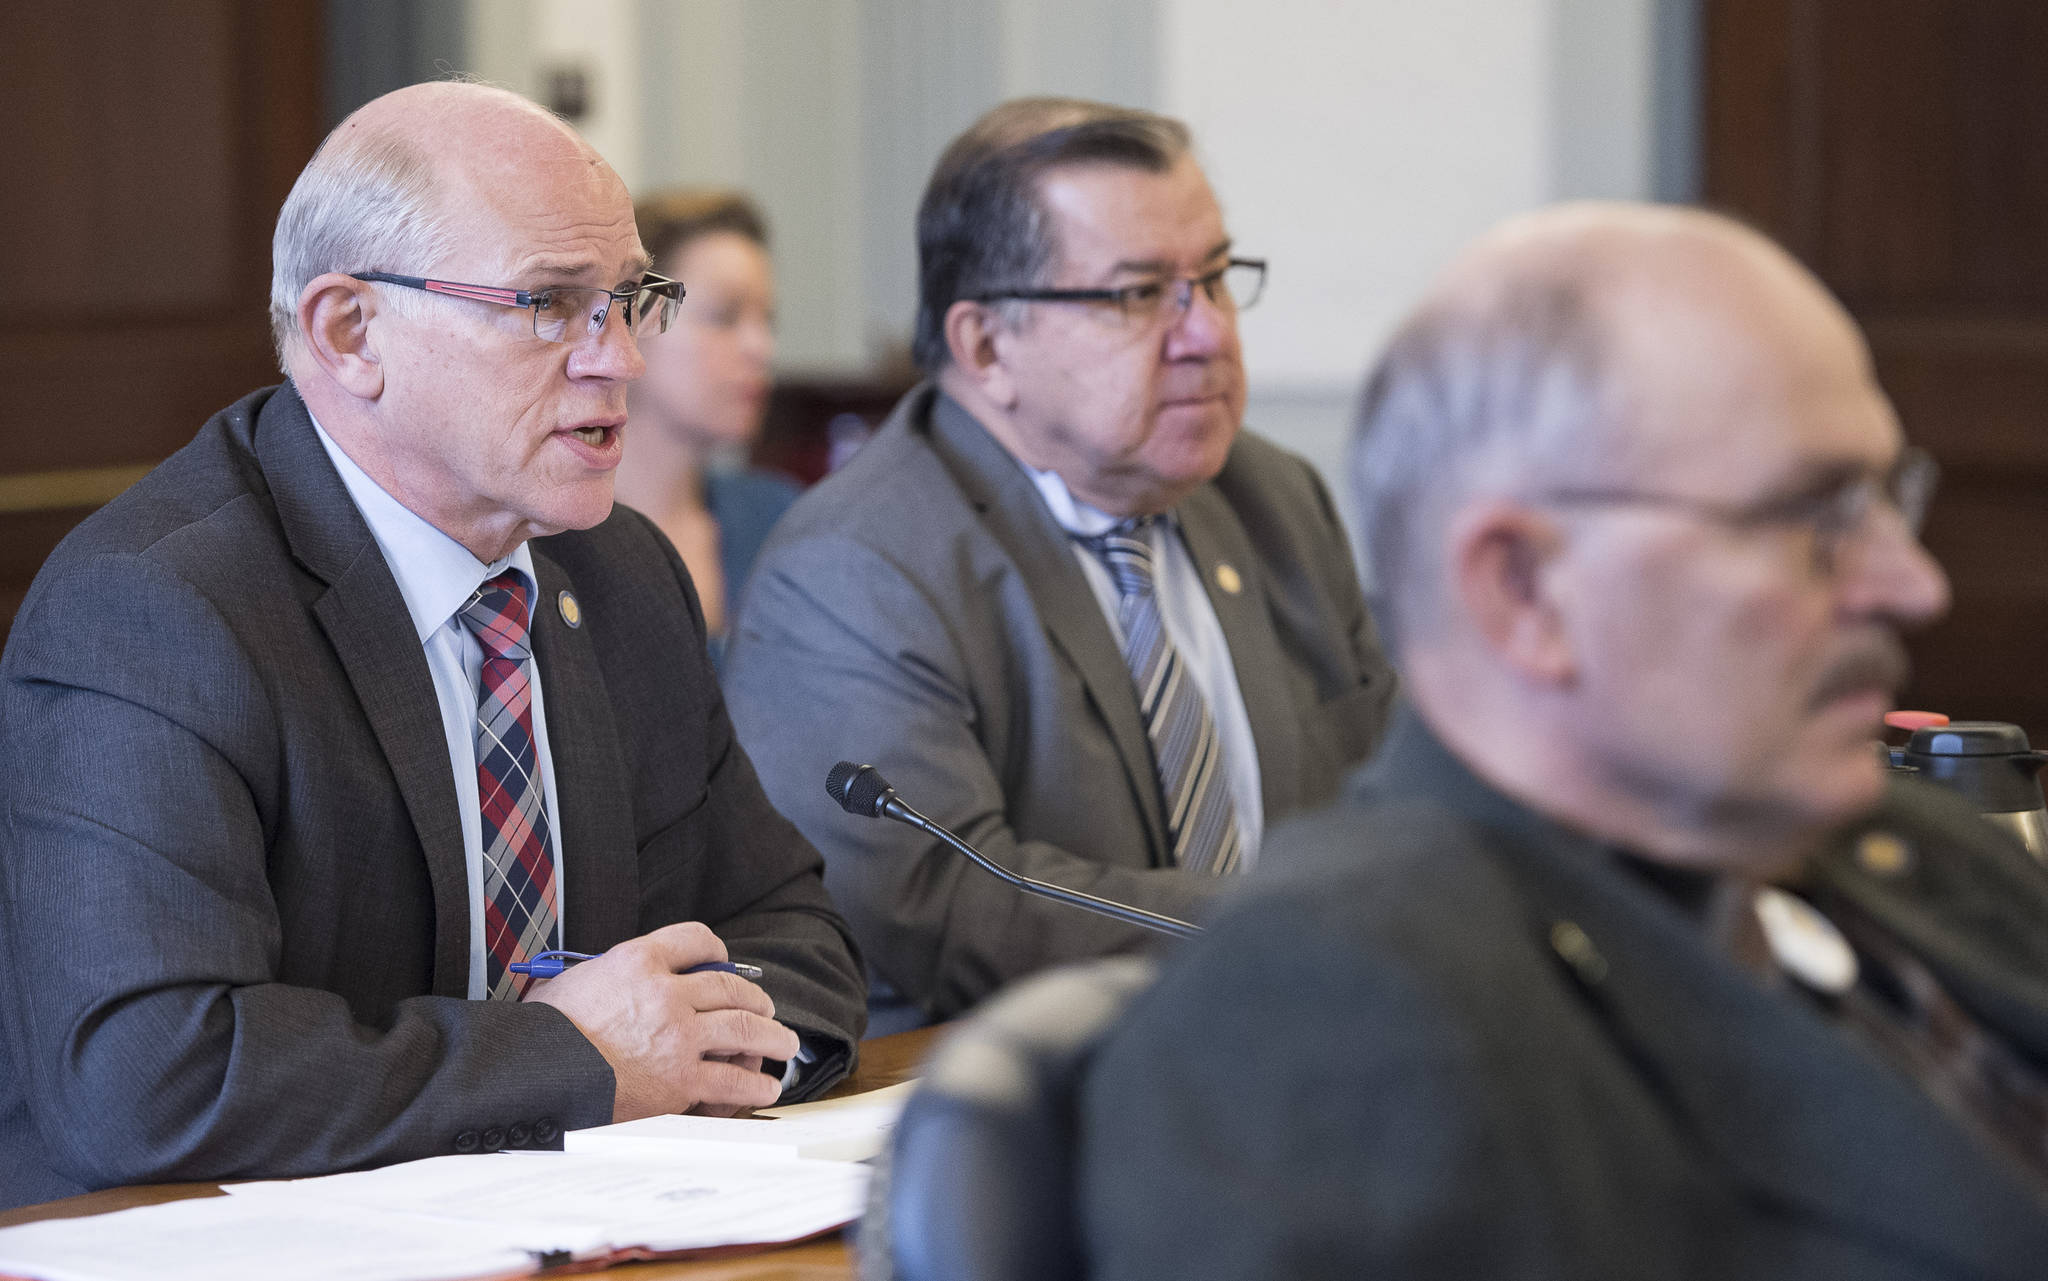 Sen. John Coghill, R-North Pole, left, Sen. Lyman Hoffman, D-Bethel, center, and Sen. Click Bishop, Fairbanks, question Commissioner of the Department of Corrections Dean Williams in Senate Finance Committee at the Capitol on Tuesday, Oct. 24, 2017. (Michael Penn | Juneau Empire)